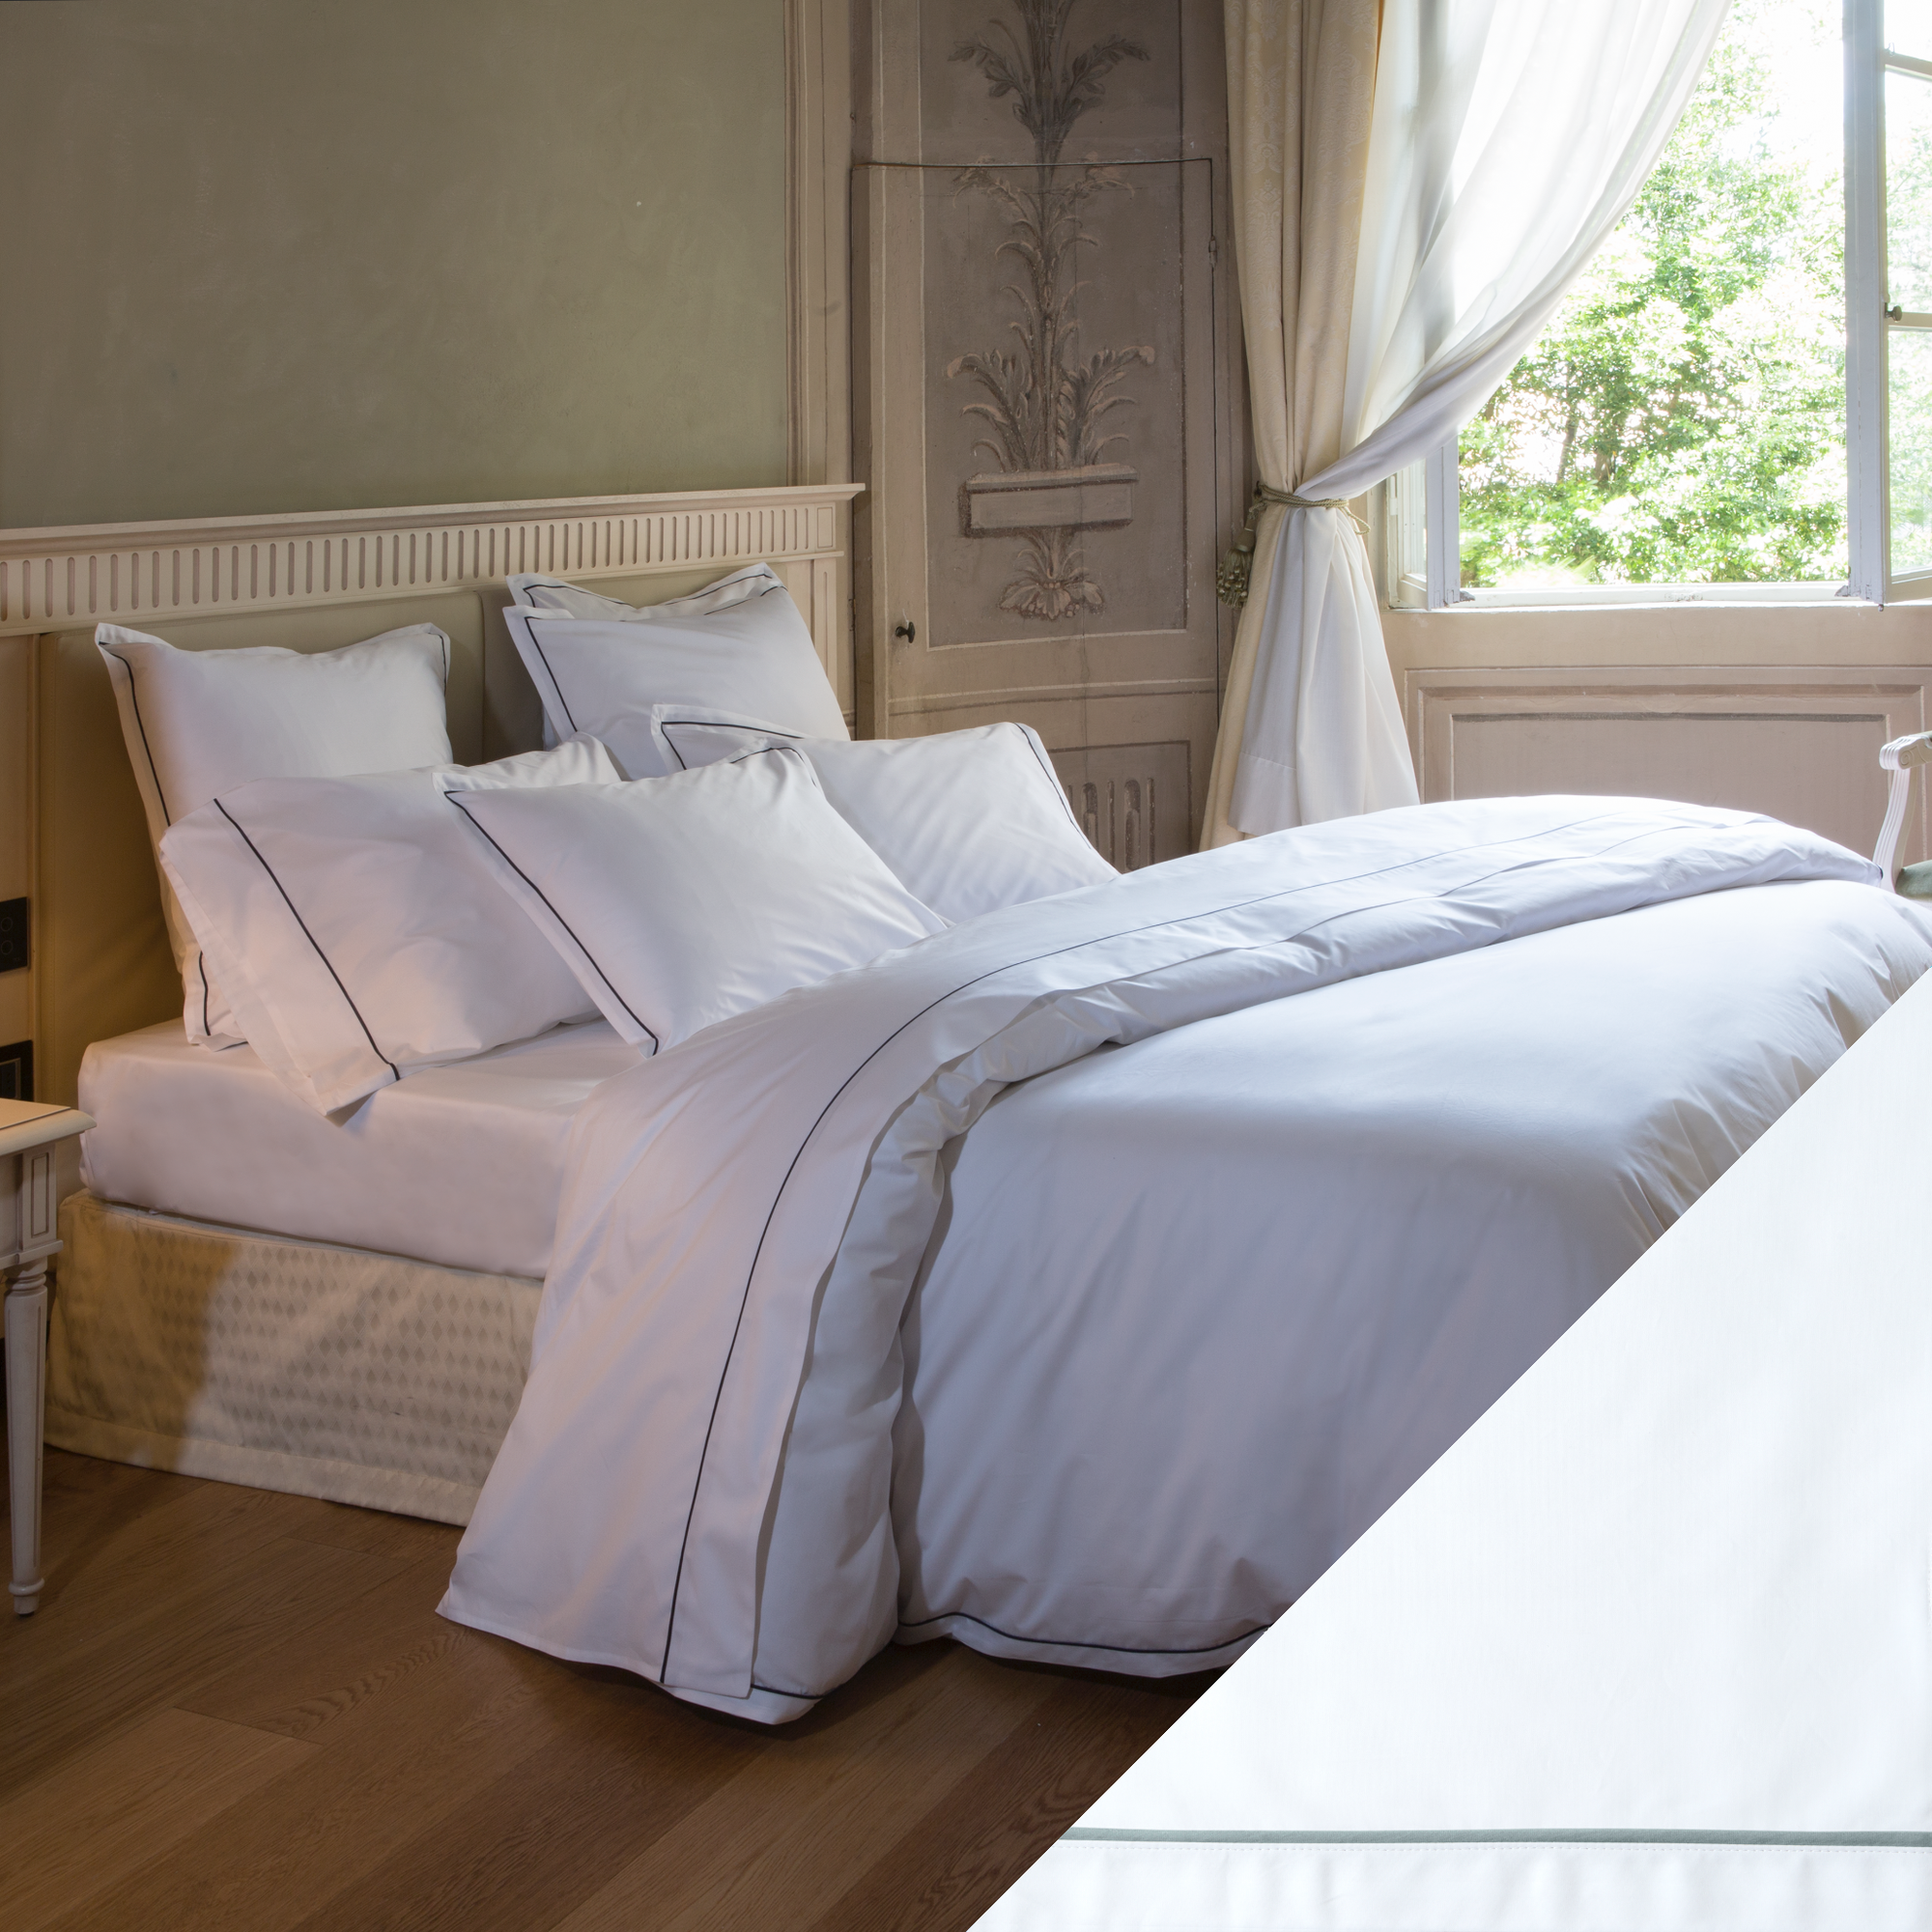 Full Bed Dressed in Signoria Luce Bedding in White Color with Wilton Blue Swatch